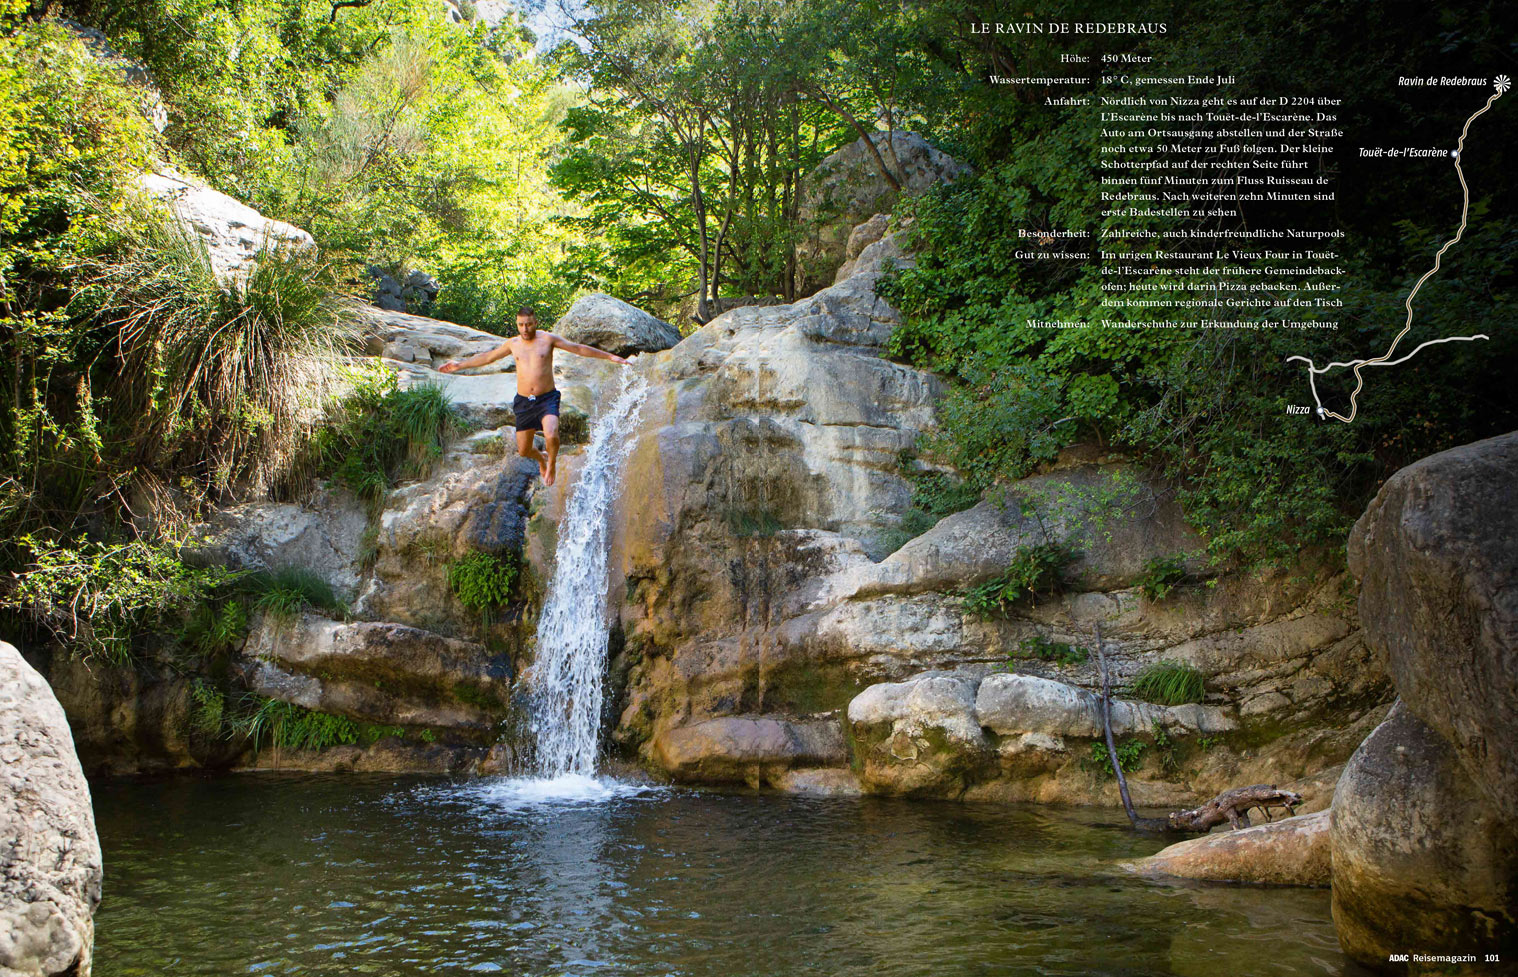 Double page magazine spread showing a full bleed photograph of a man jumping into the water below a waterfall